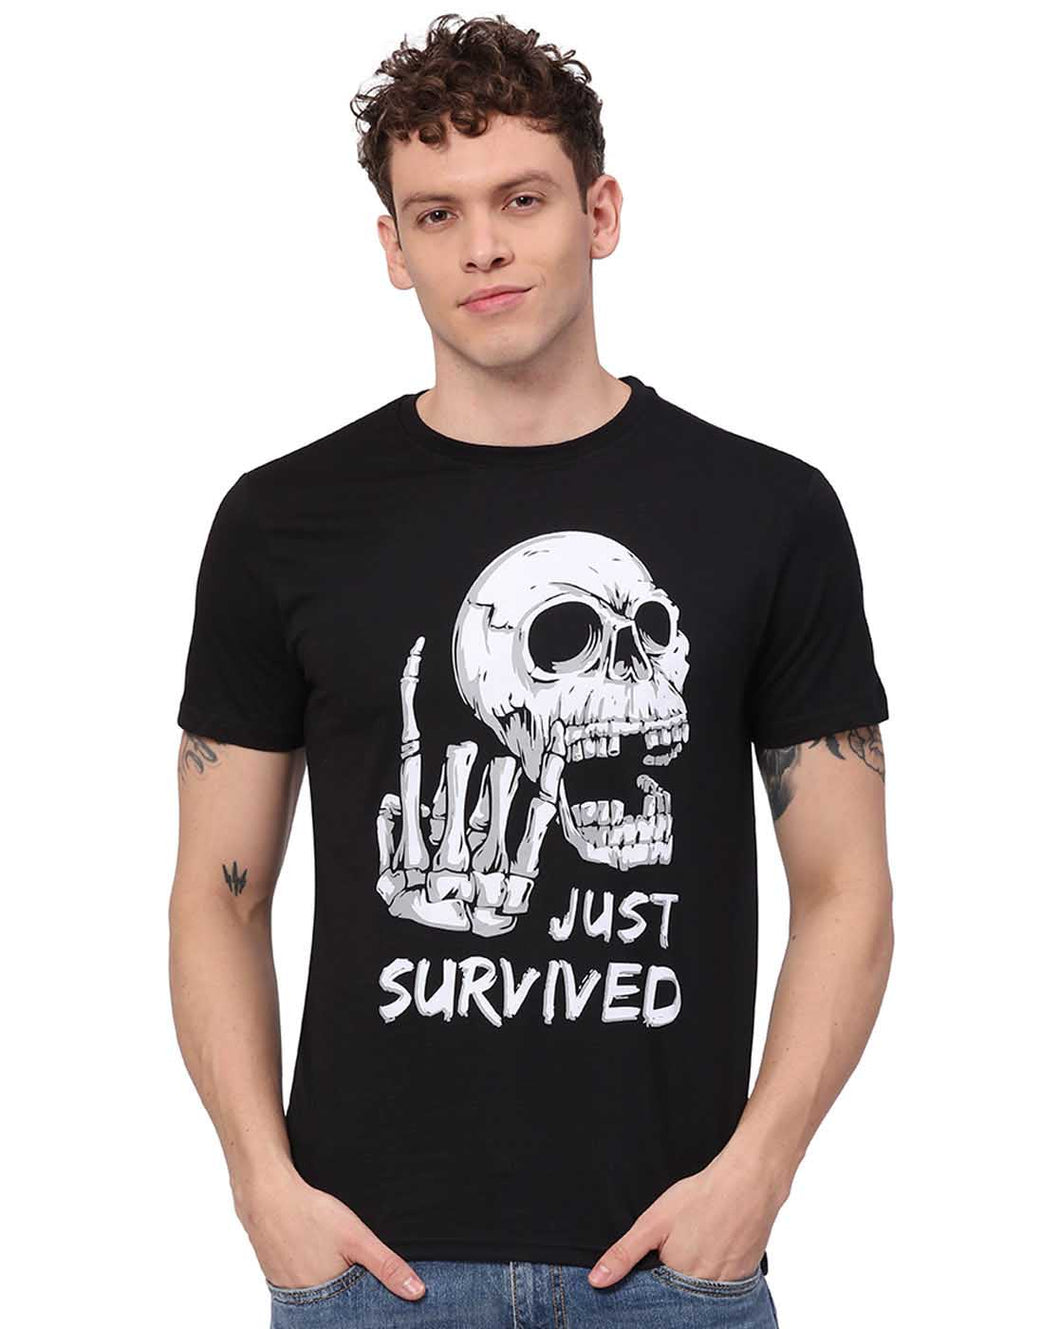 Survived Tee T-Shirts www.epysode.in 